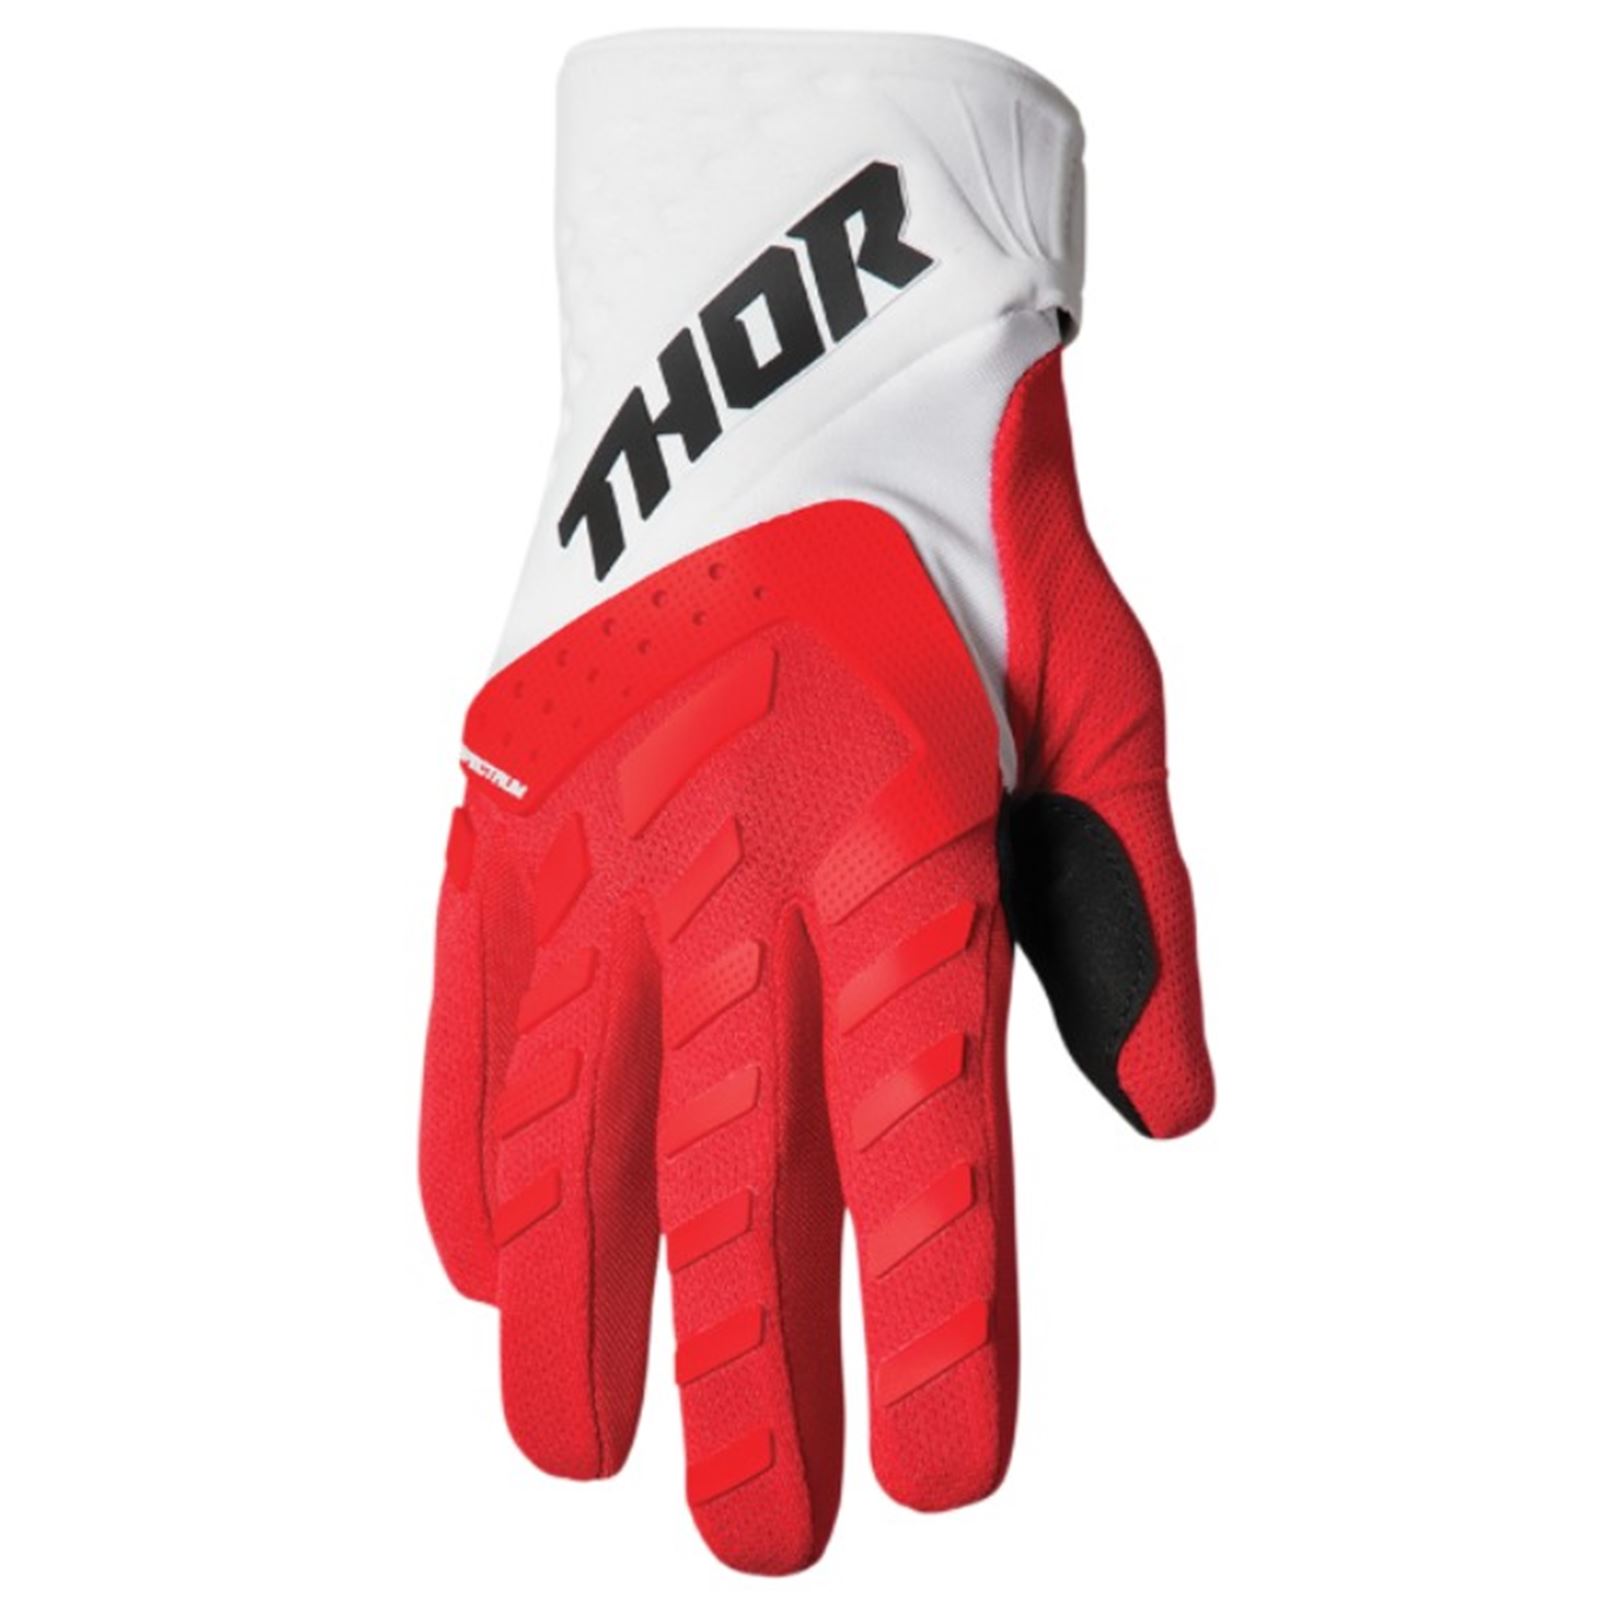 Thor Spectrum Gloves - Red/White - Small